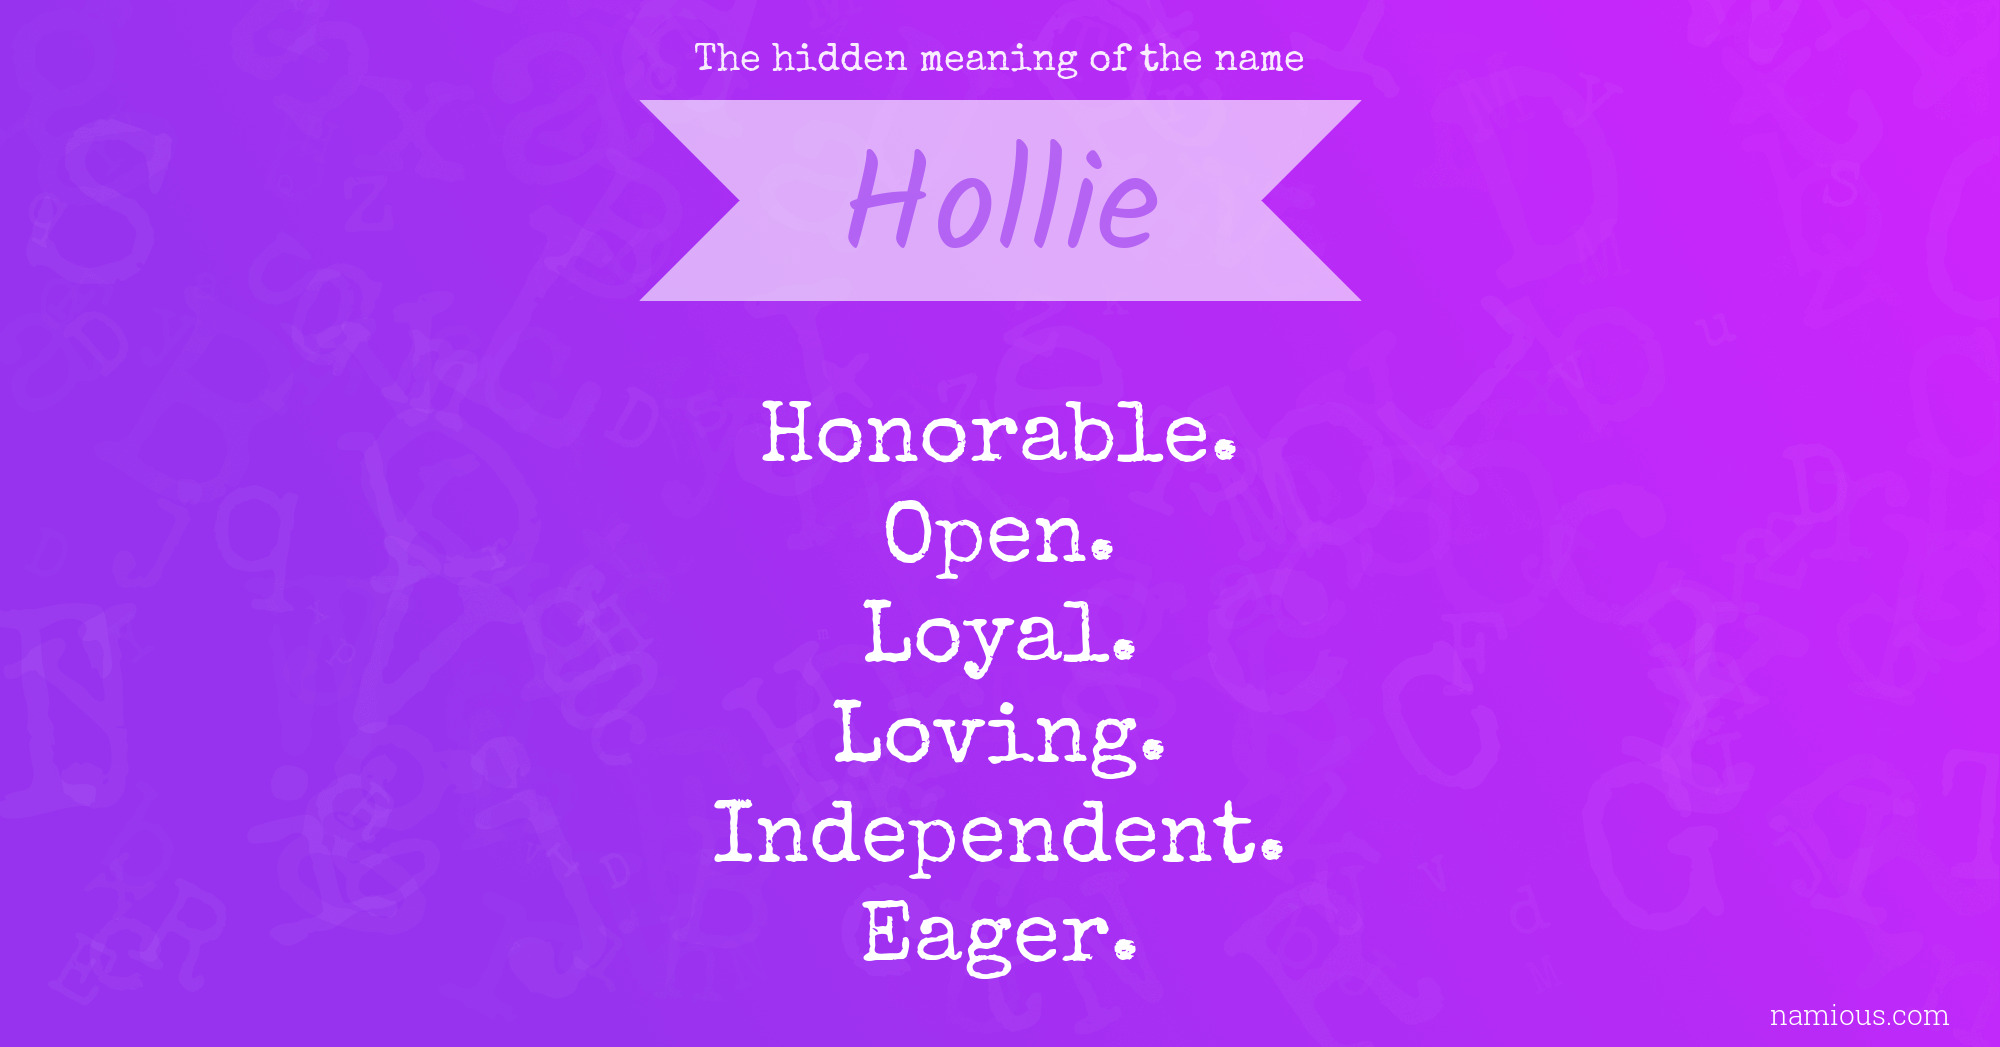 The hidden meaning of the name Hollie